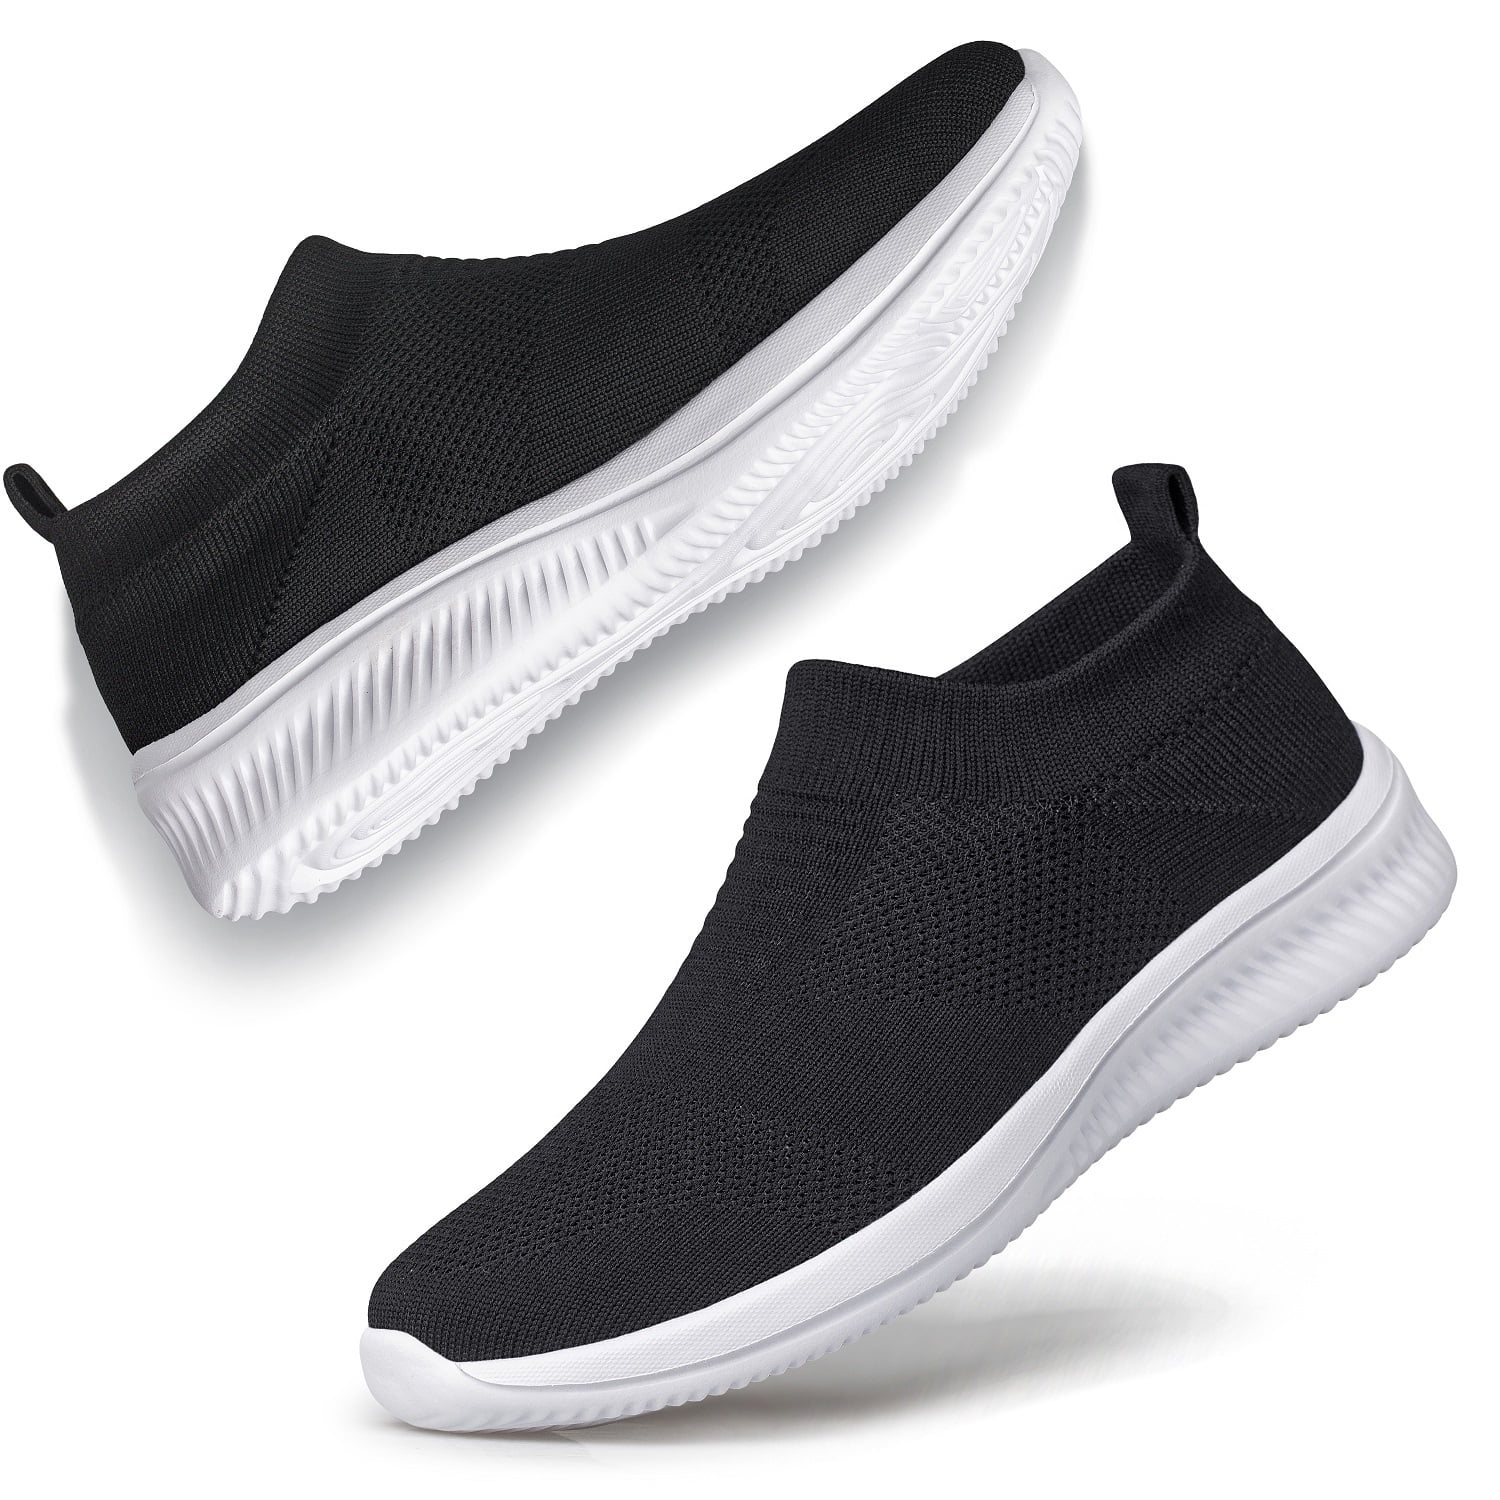 ADQ Women's Slip on Shoes Casual Shoes Lightweight Breathable Anti-Slip ...